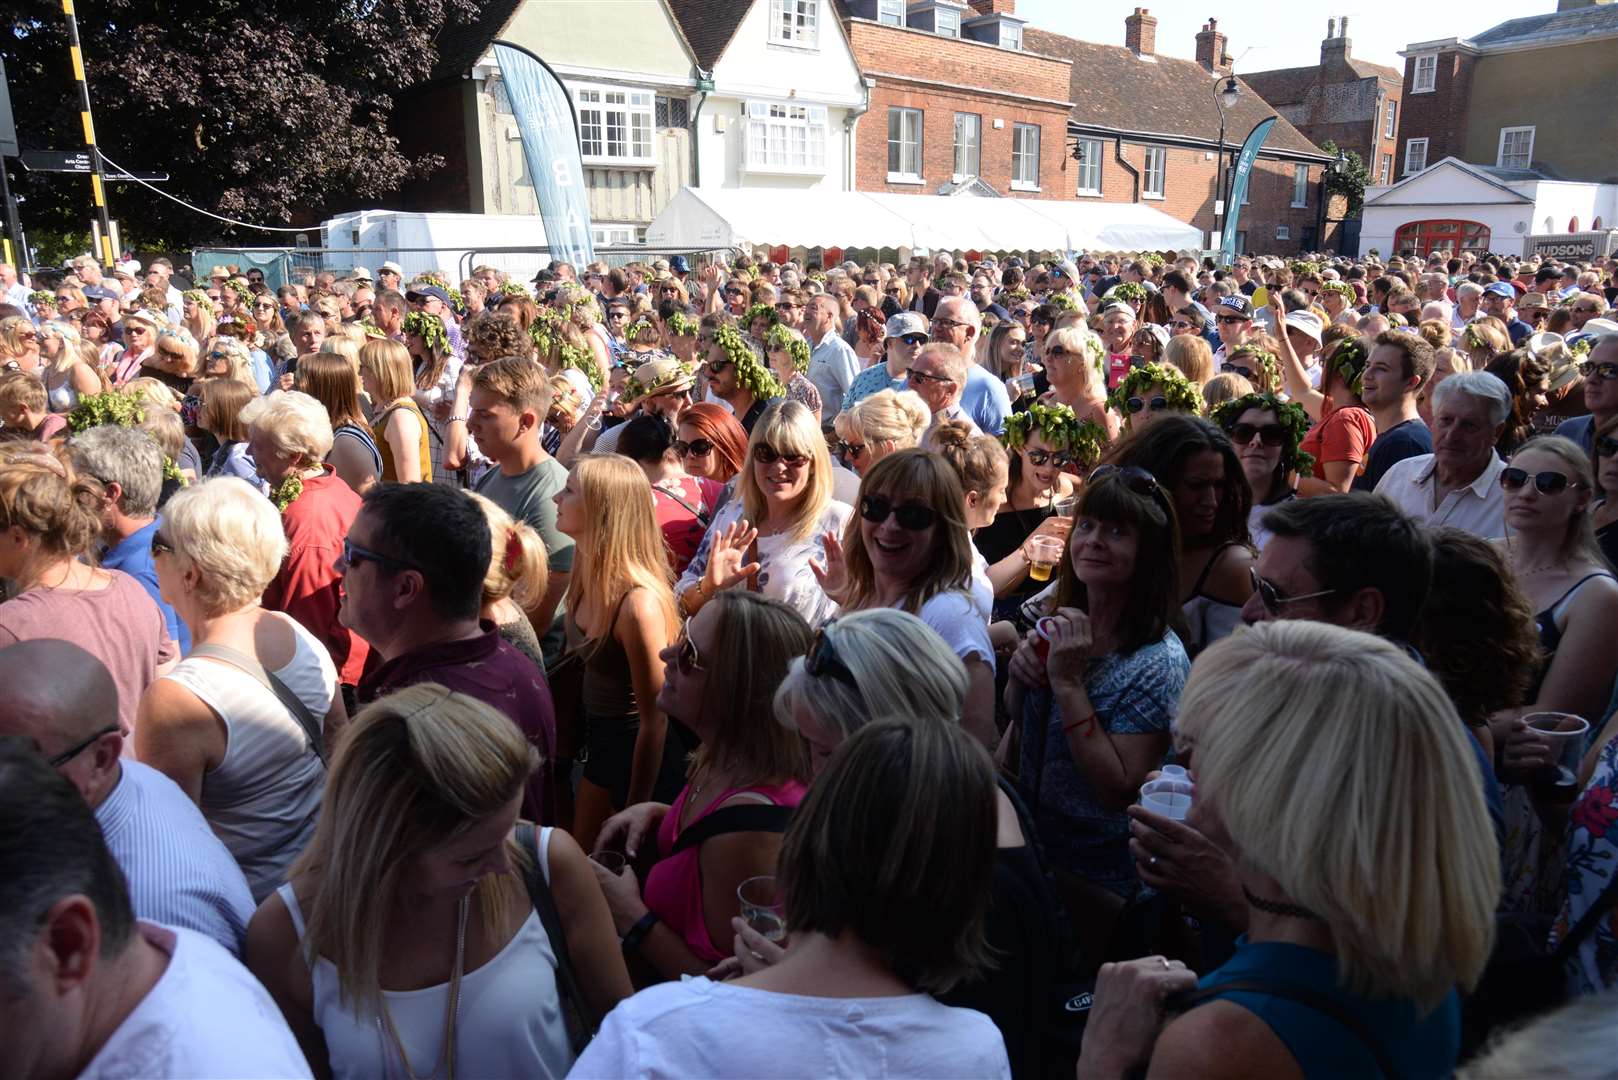 The crowded scene around the Spitfire stage